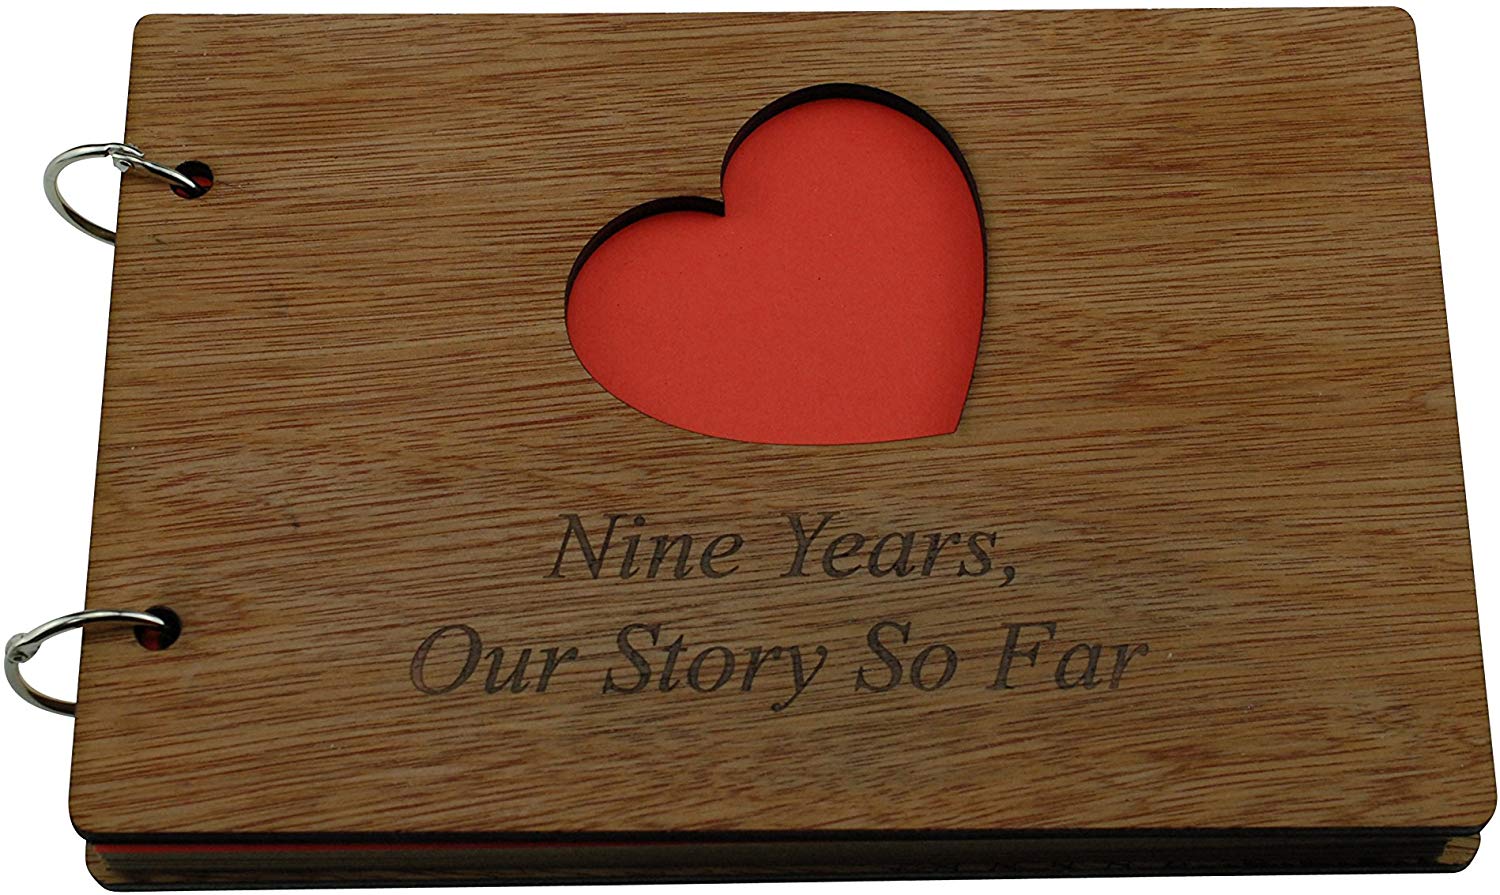 9 Years Our Story So Far - Scrapbook, Photo album or Notebook